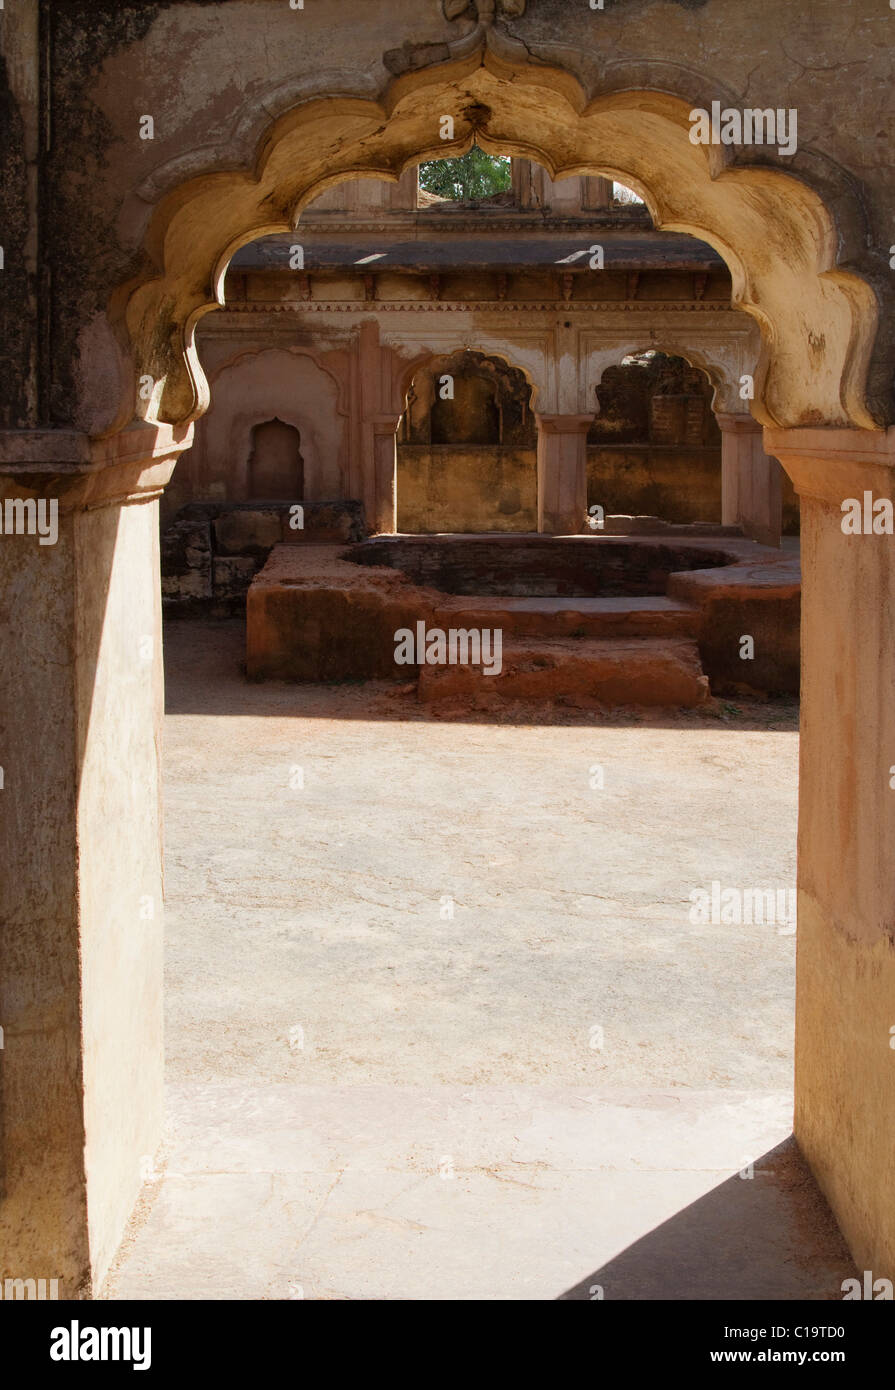 Archway in a fort, Orchha Fort, Orchha, Madhya Pradesh, India Stock Photo